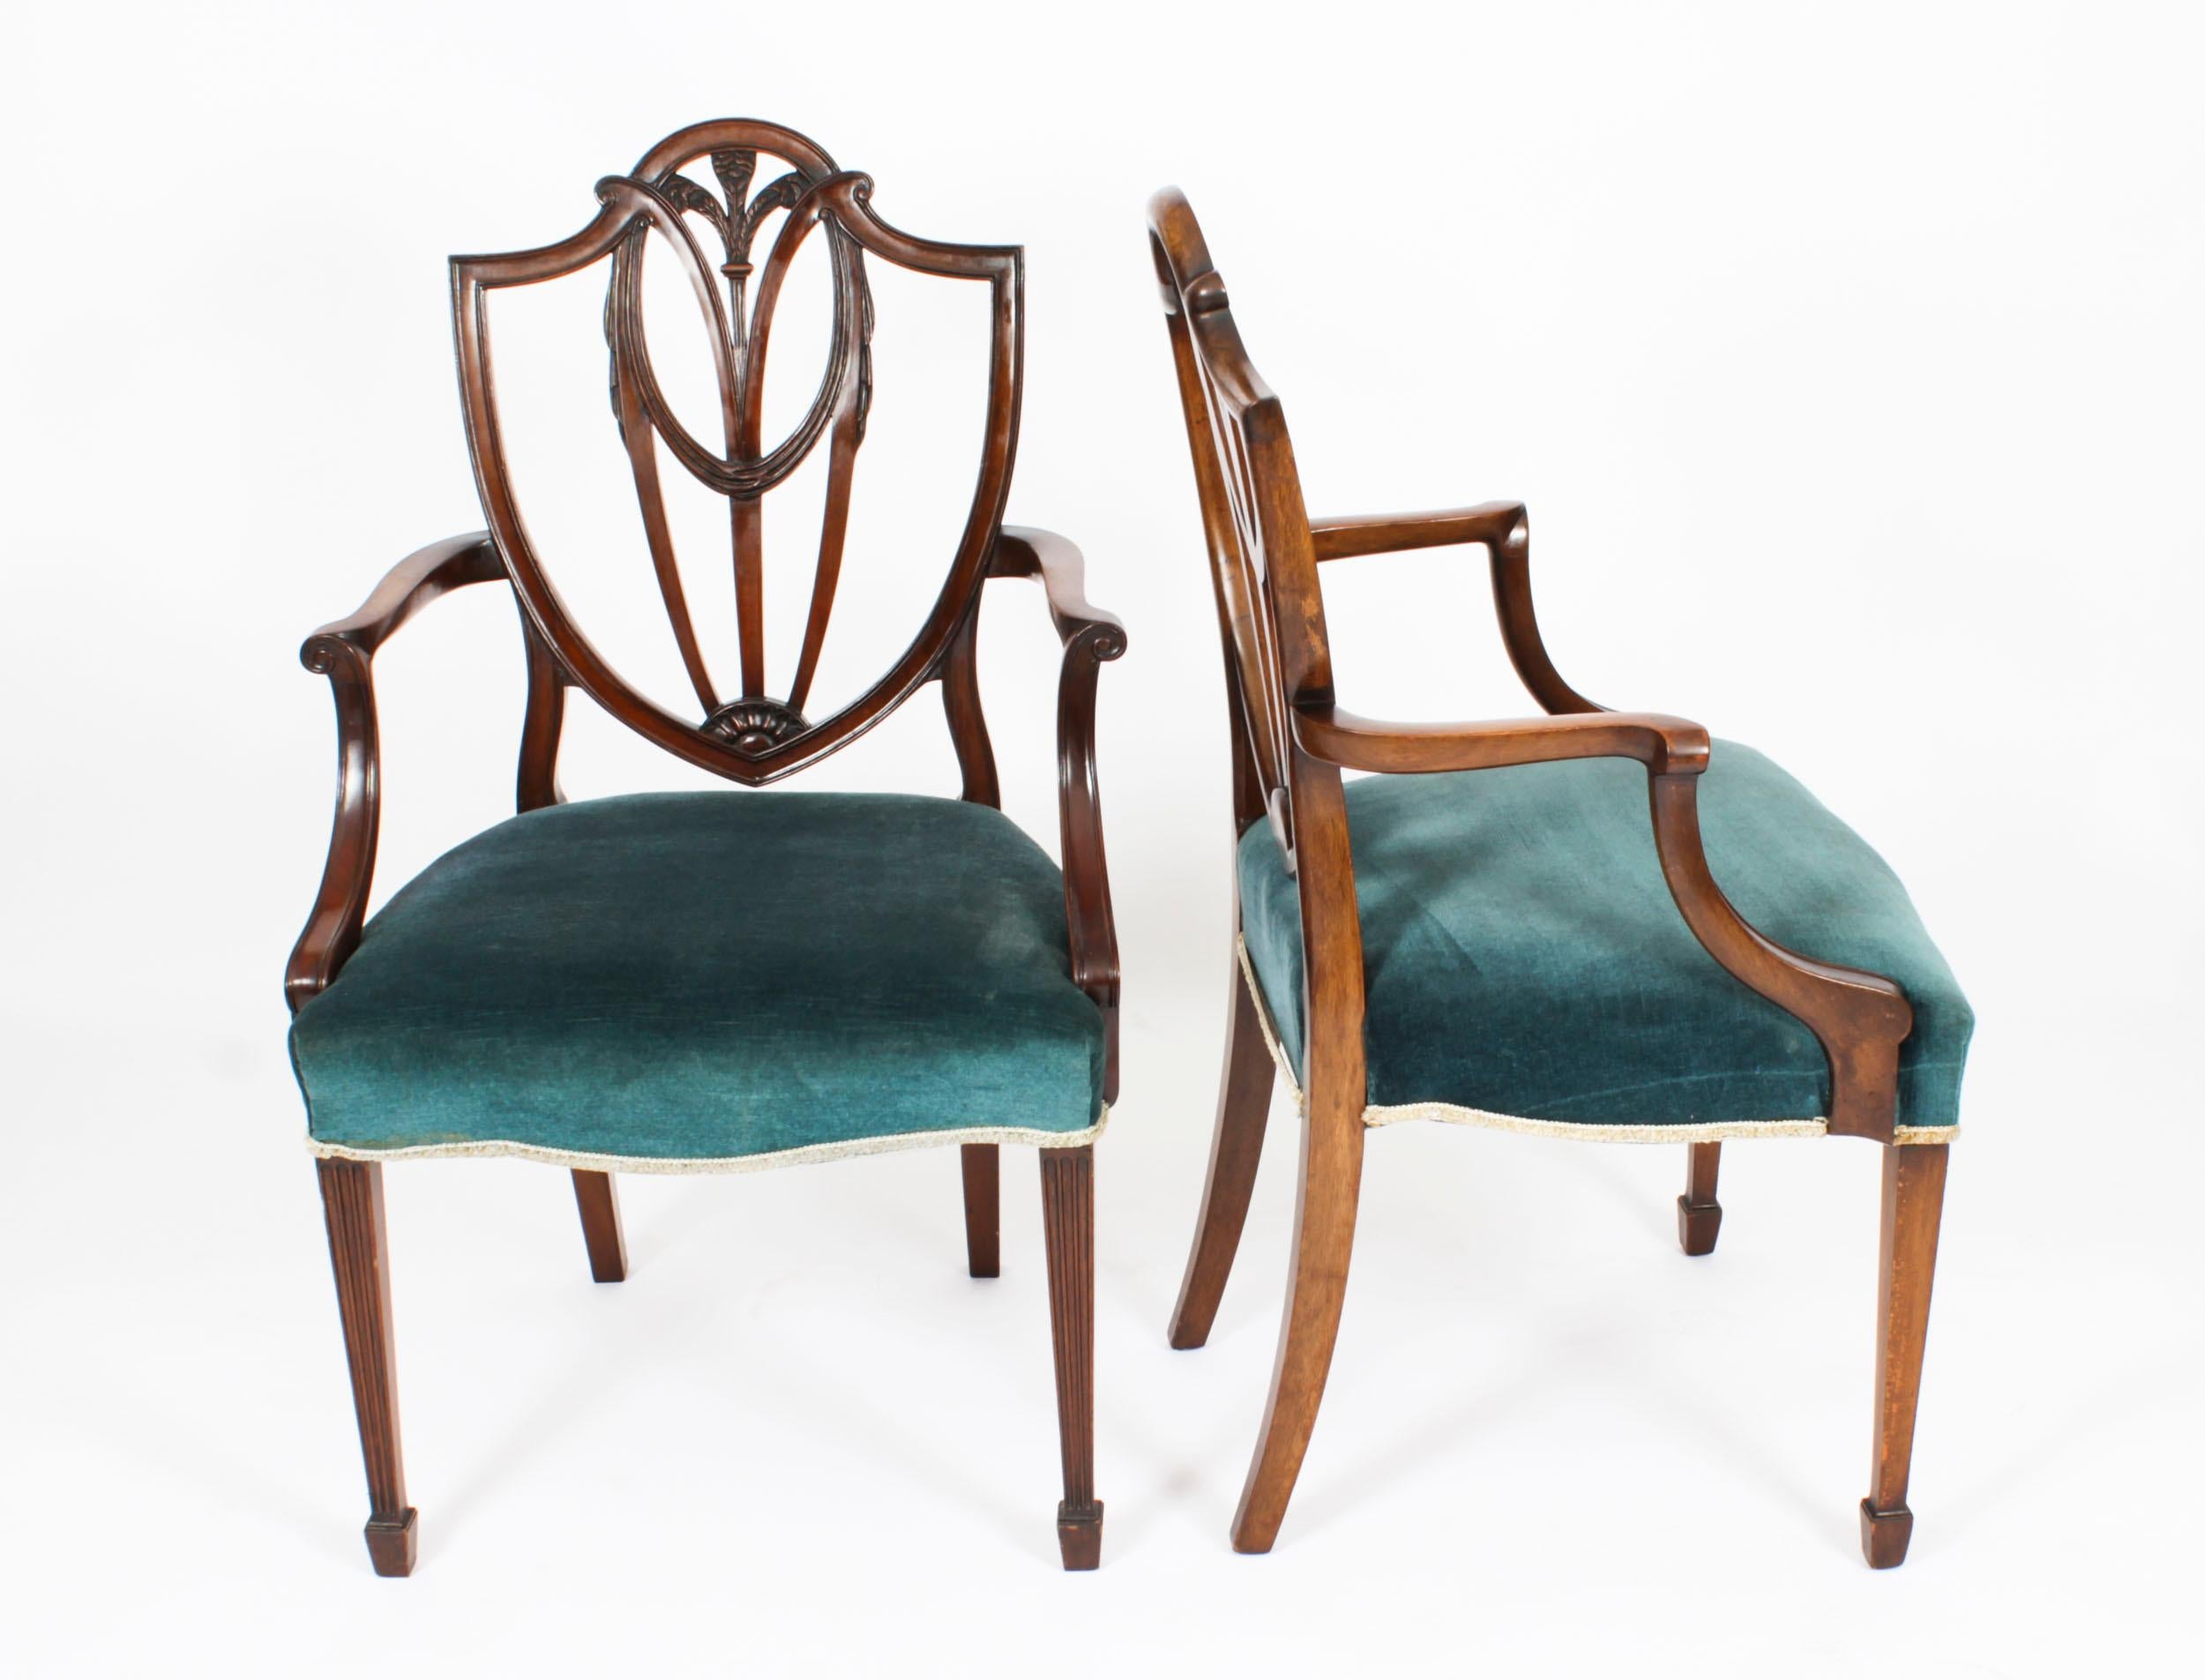 This is a fantastic antique English made set of eight mahogany shield back dining chairs of 